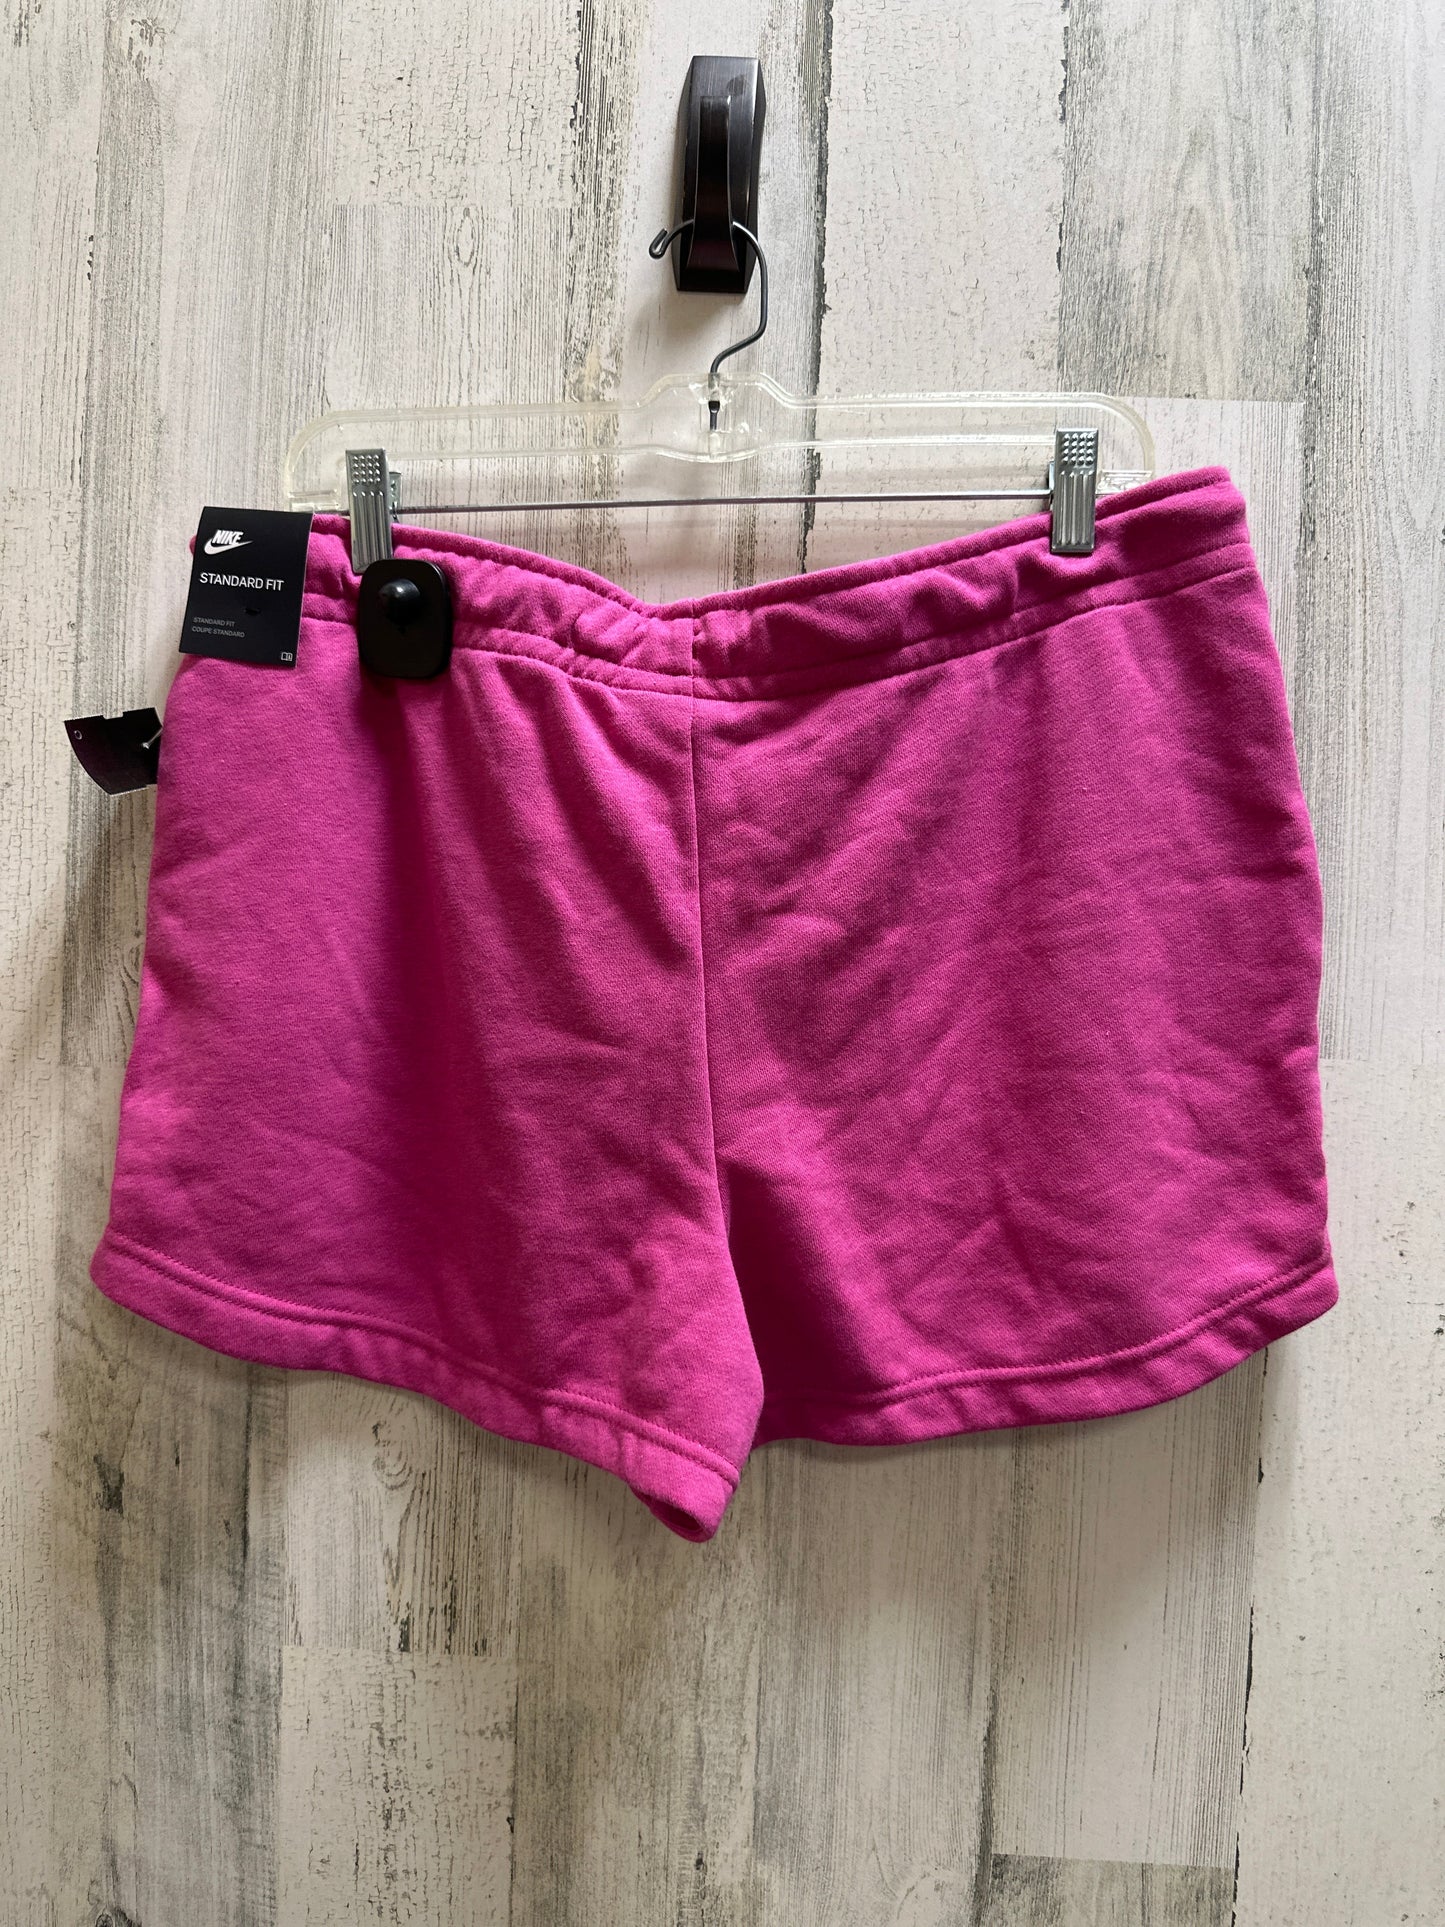 Pink Athletic Shorts Nike Apparel, Size L